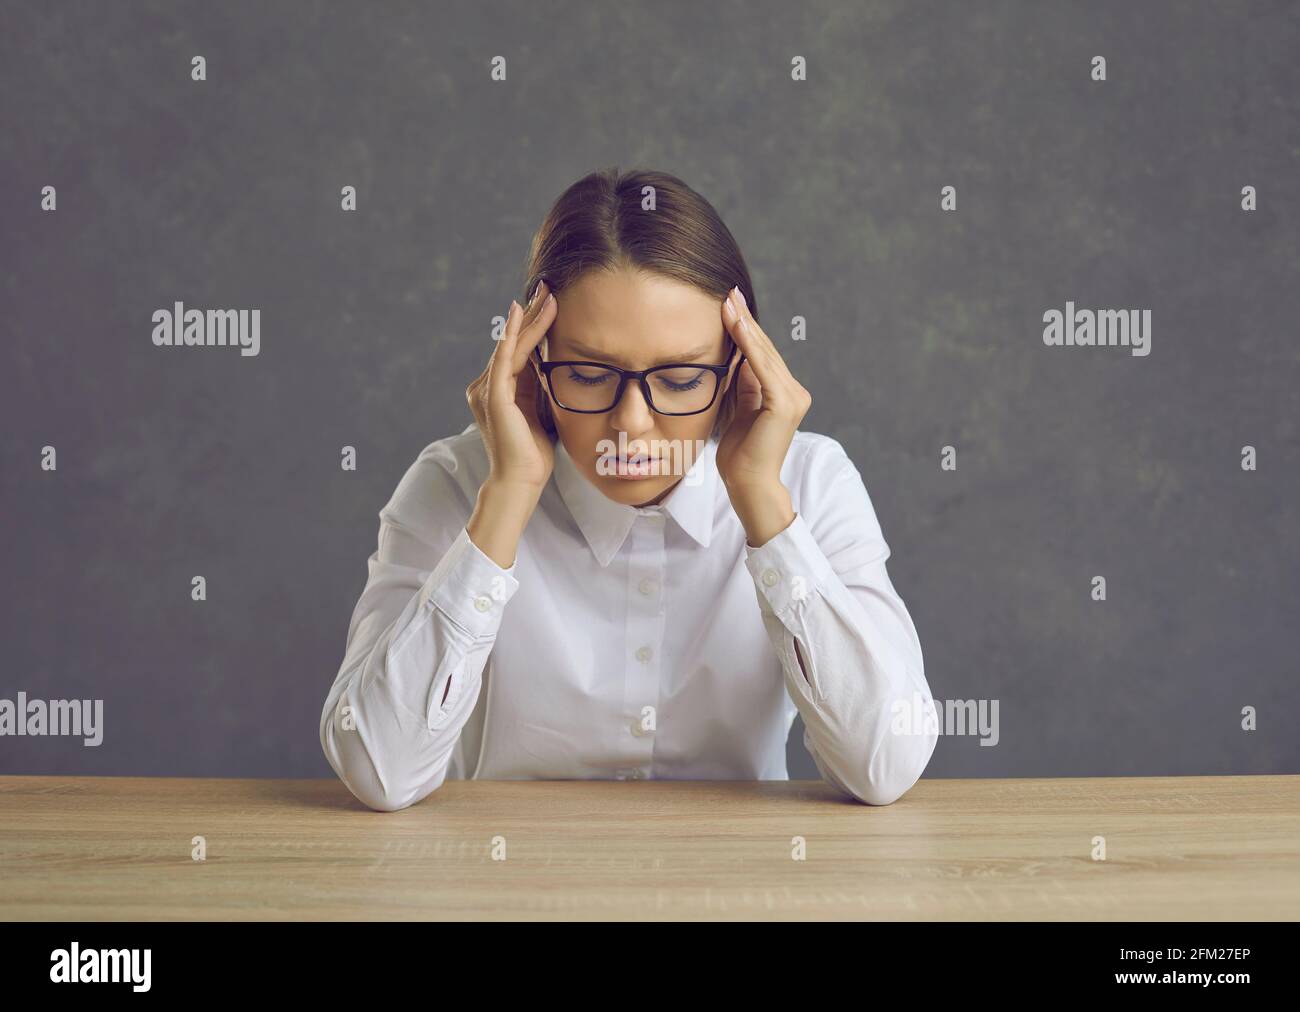 Tired woman office worker or teacher suffering from headache sitting at desk Stock Photo